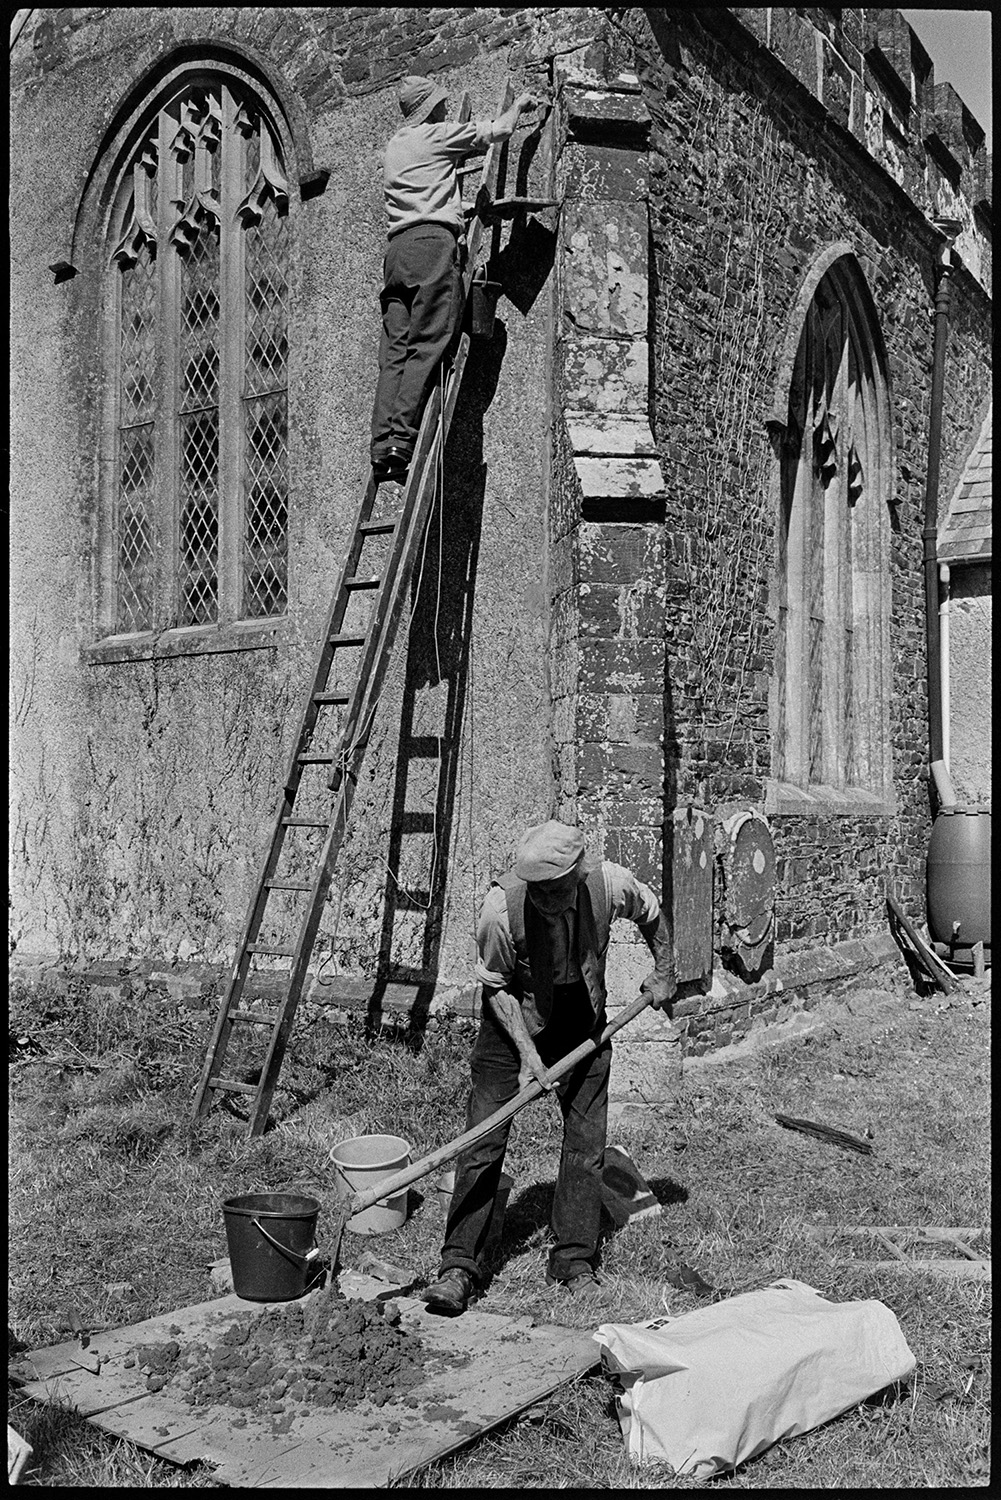 Vicar and helpers repairing church.
[A man up a wooden ladder repointing the stonework at Kings Nympton Church. Church windows and stone buttress are visible. Another man is mixing mortar with a spade, on wood planks in the churchyard.]